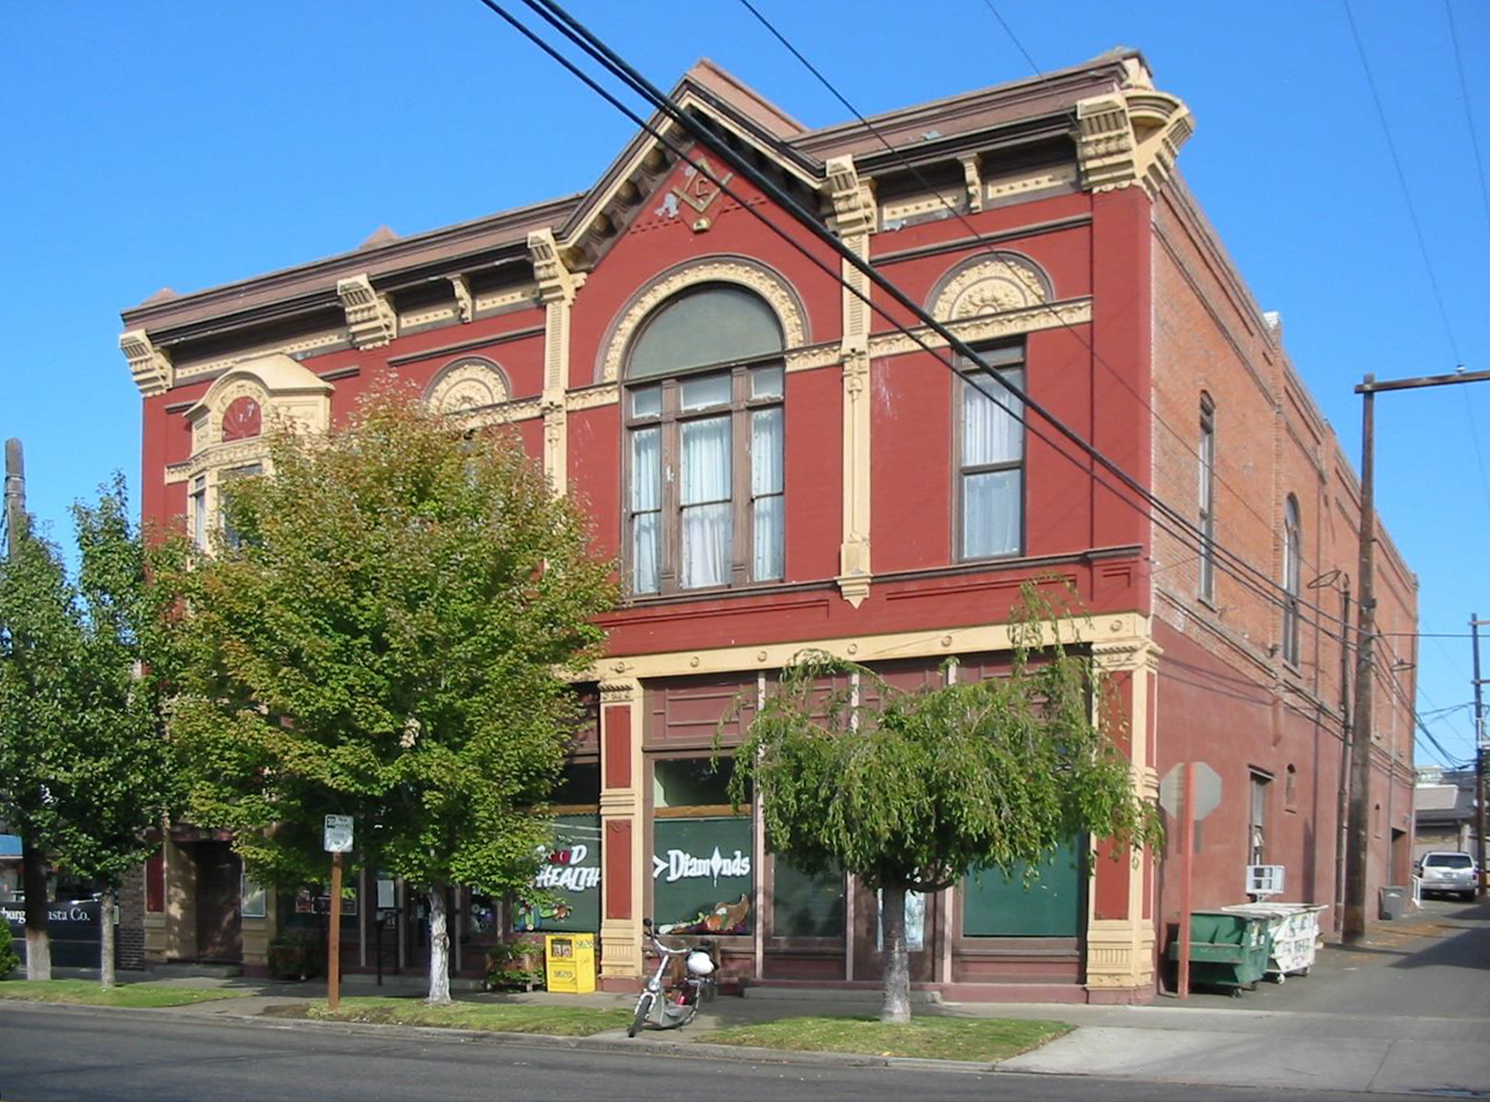 The Ellensburg Masonic Temple Association received $2,000 to replace deteriorated exterior trusses on the roof of the 1890 Masonic Temple. Recipient of a building assessment grant in 2016, the Masonic Temple Association utilized the data collected to inform their grant request.